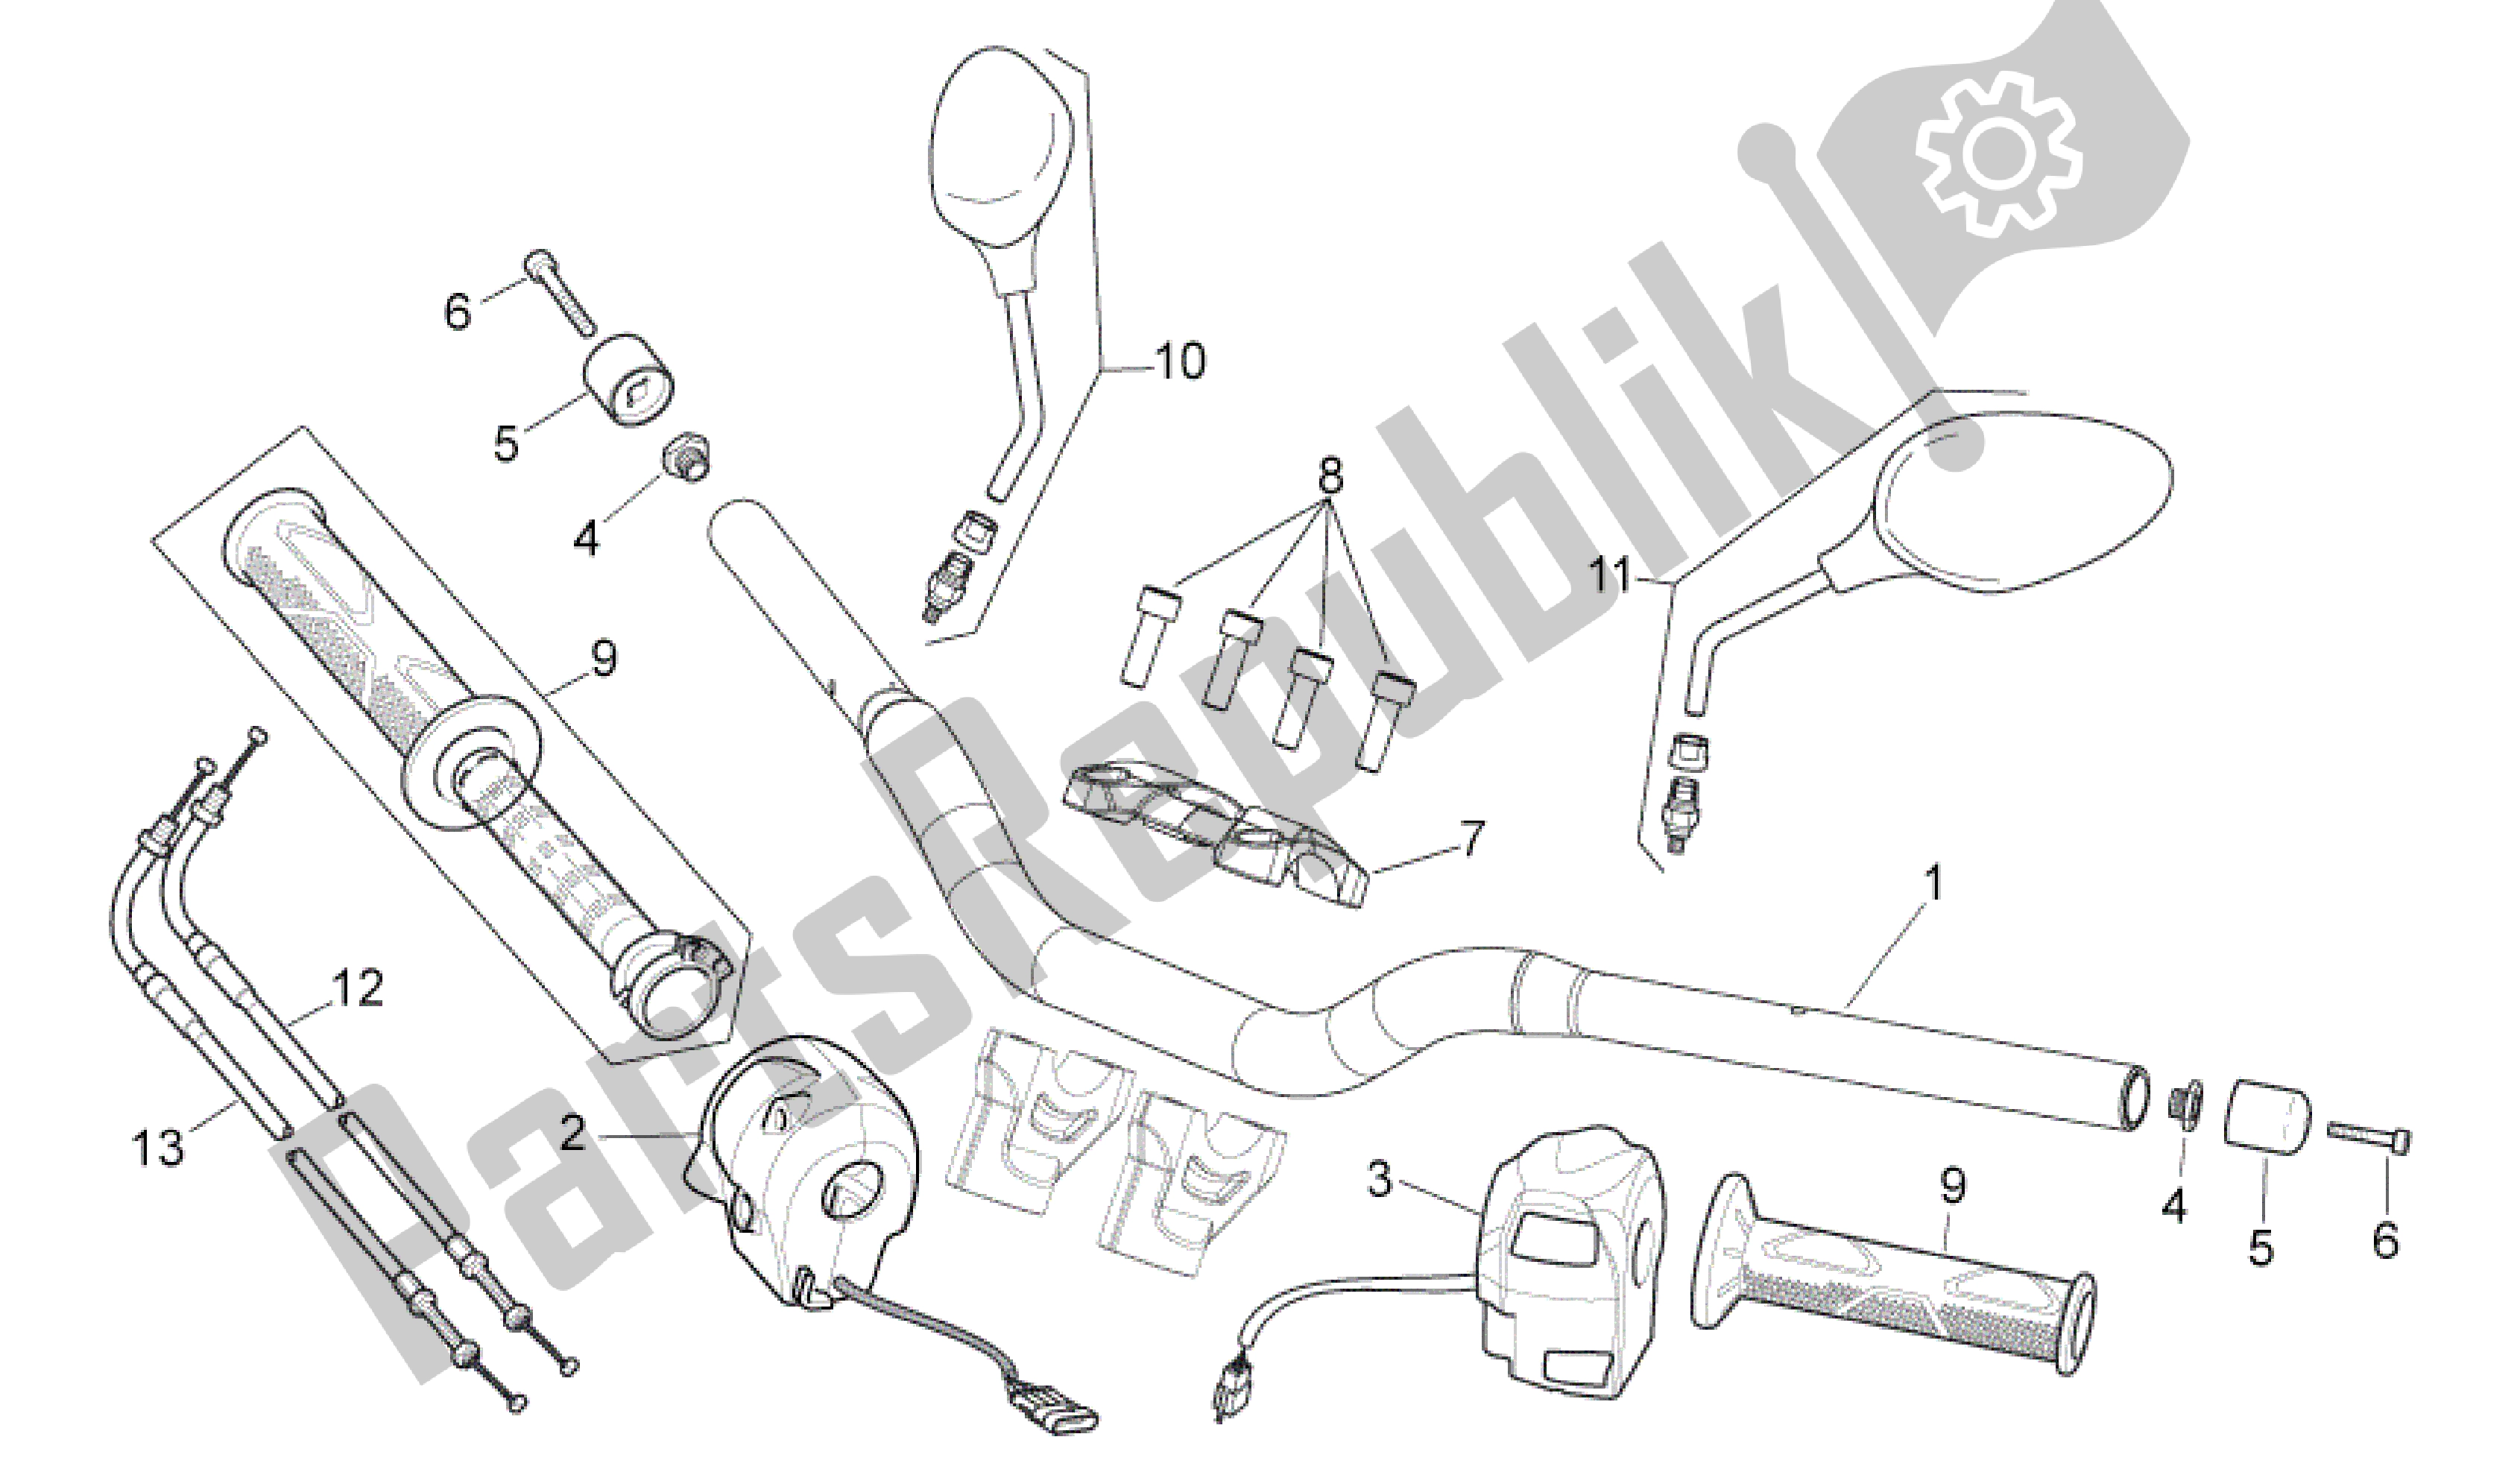 All parts for the Handlebar - Controls of the Aprilia Shiver 750 2009